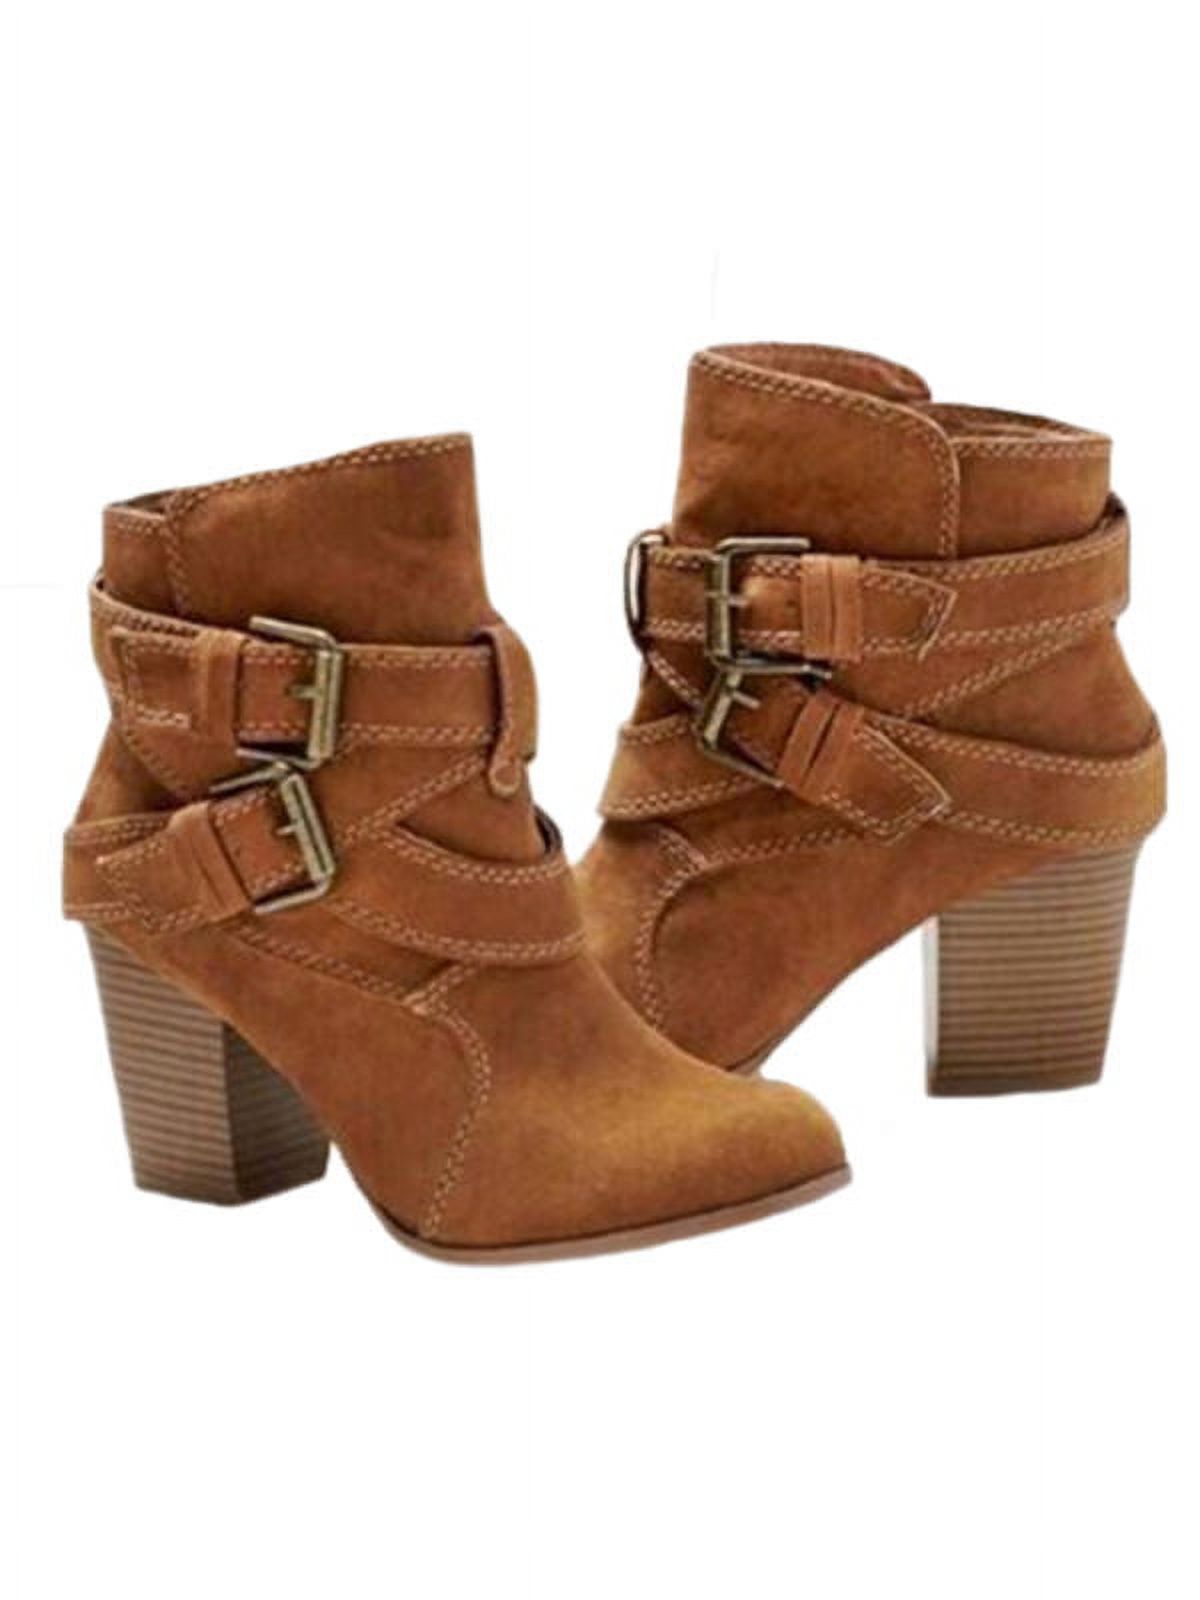 Women's Block High Heel Short Ankle Boots Casual Buckle Martin Booties Shoes - image 1 of 2